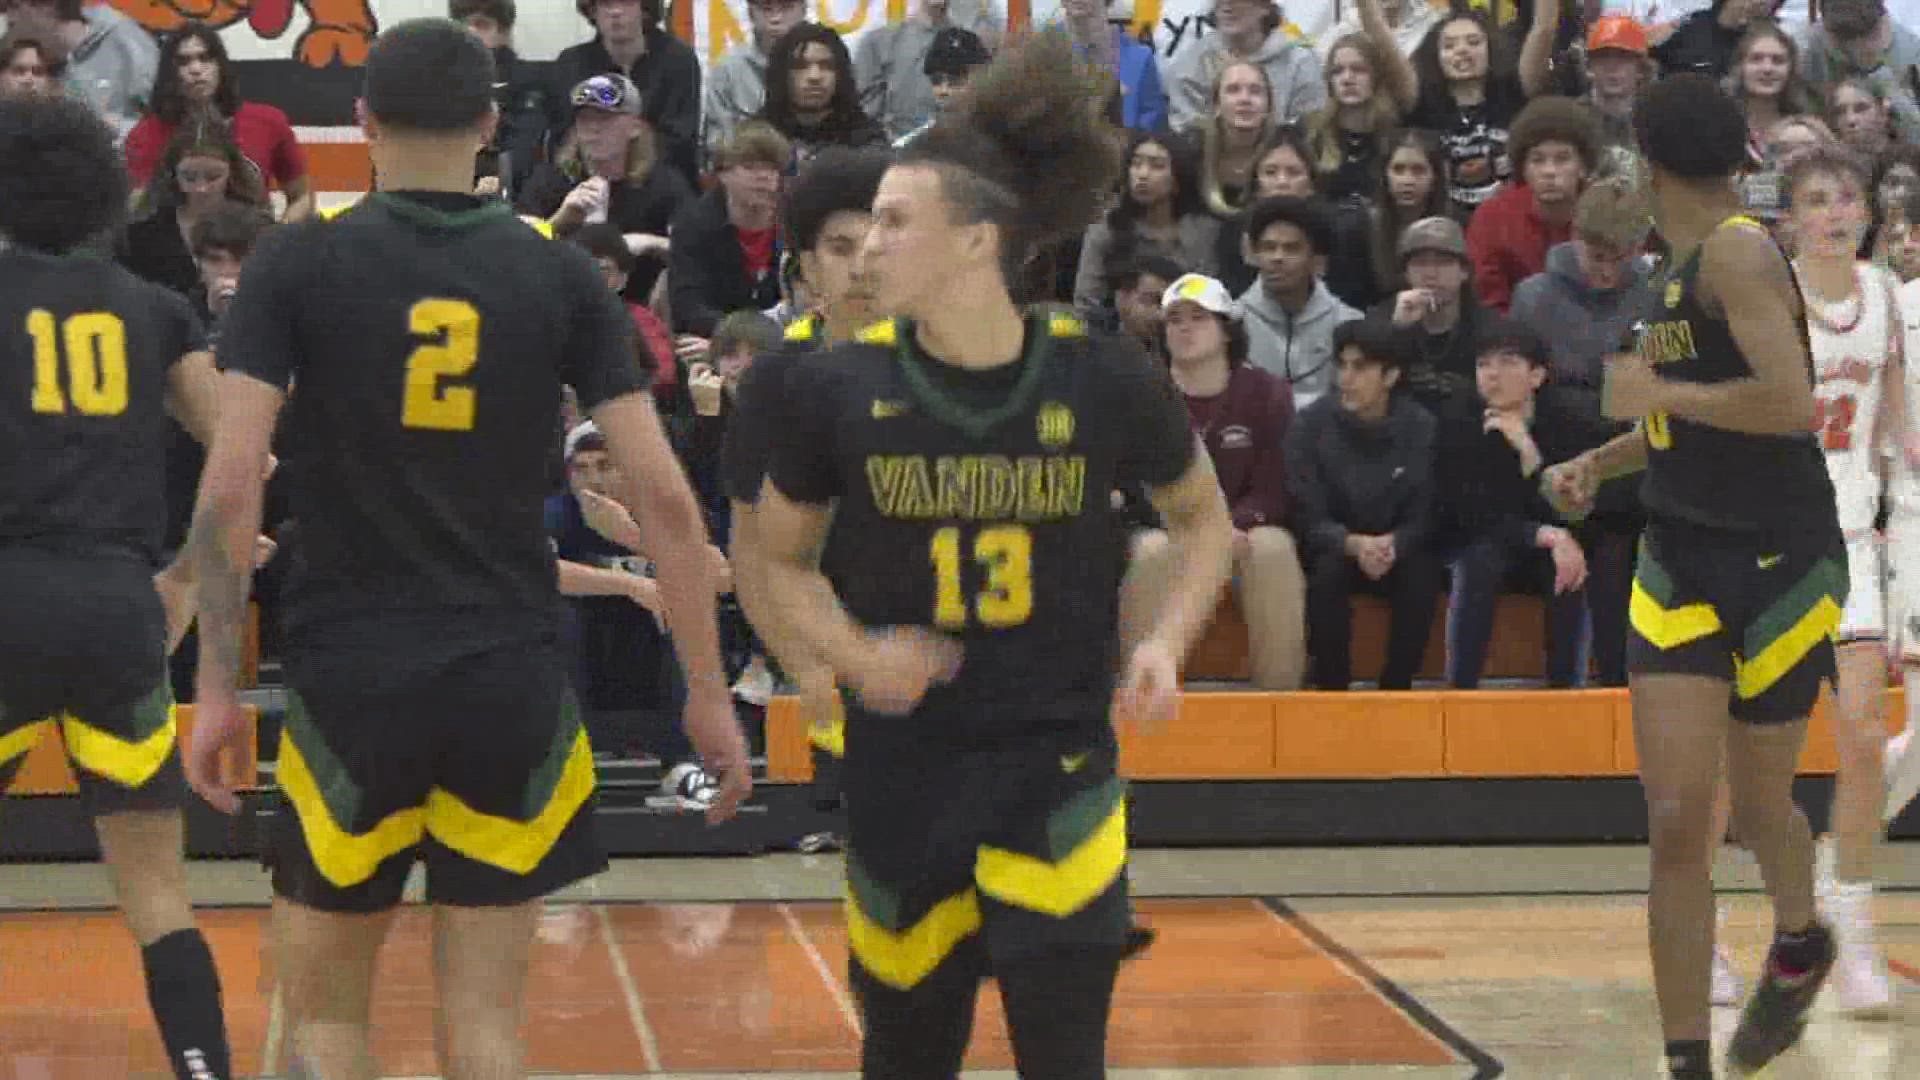 Two undefeated team met up on the basketball court, but only the Vacaville Bulldogs were able to stay undefeated at the end.